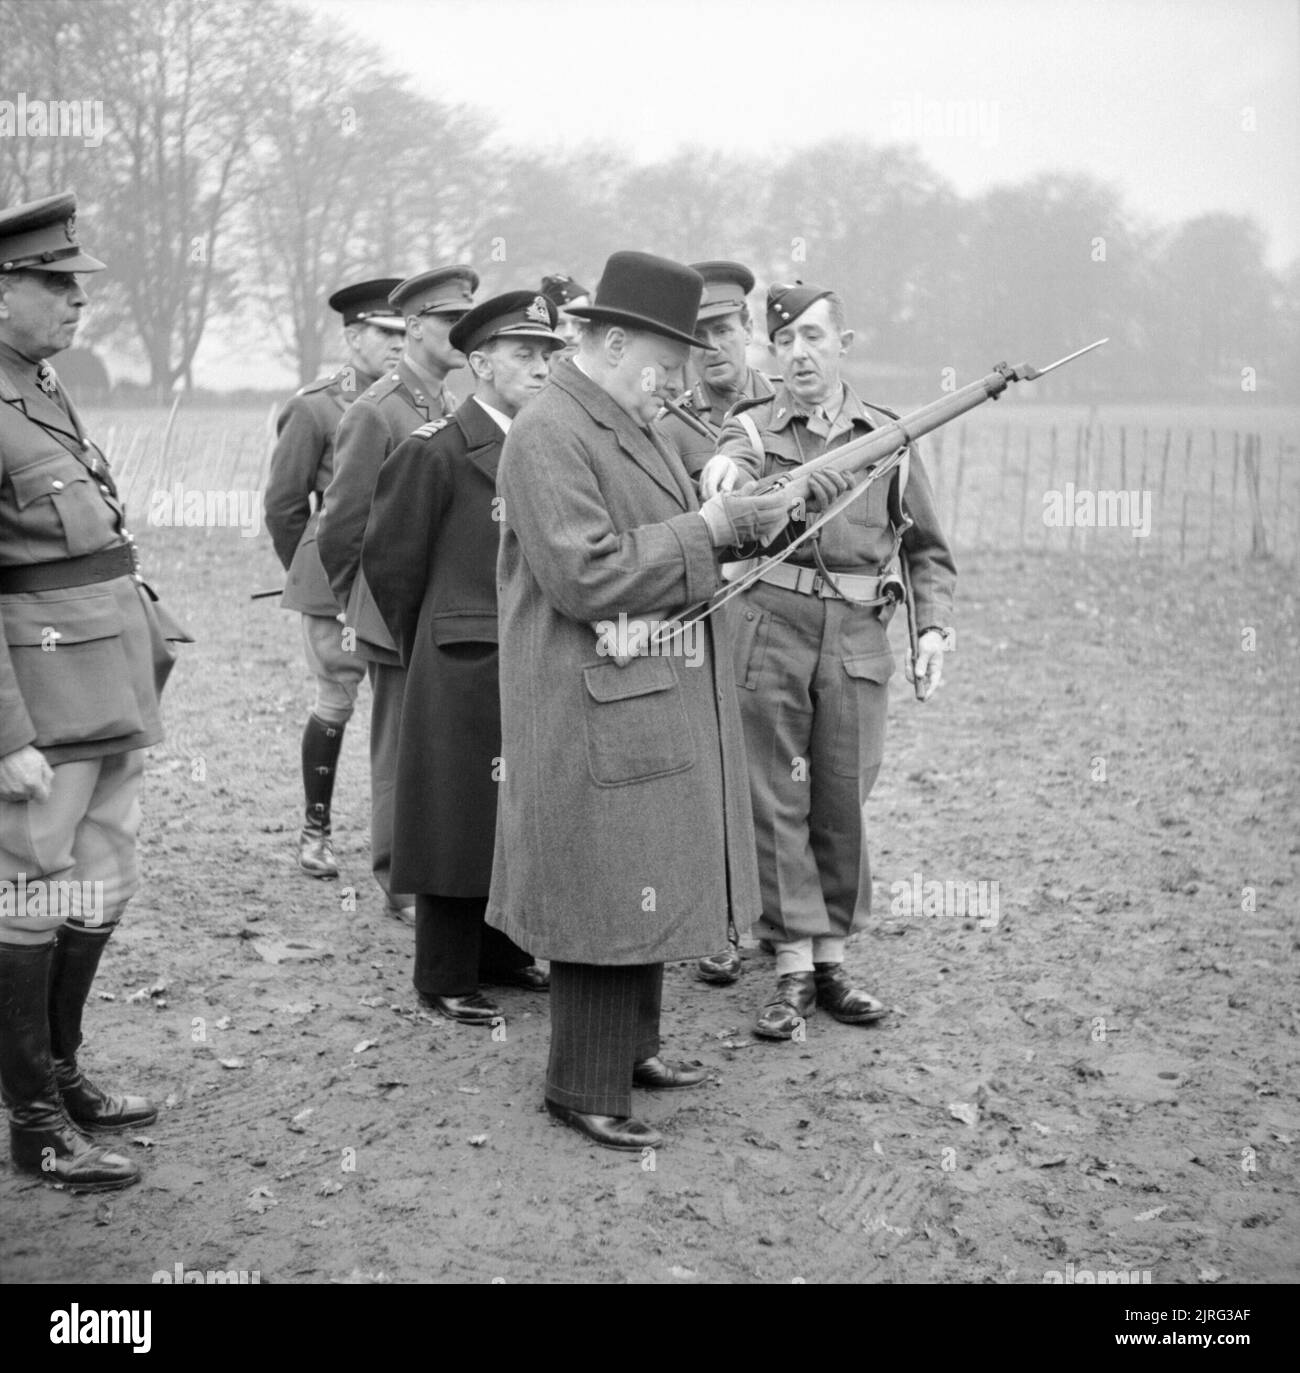 Winston Churchill inspects the new Lee-Enfield No. 4 Mk 1 rifle during a visit to 53rd Division in Kent, 20 November 1942. Winston Churchill inspects the new Lee-Enfield No. 4 rifle with spike bayonet during a visit to 53rd Division in Kent, 20 November 1942. Stock Photo